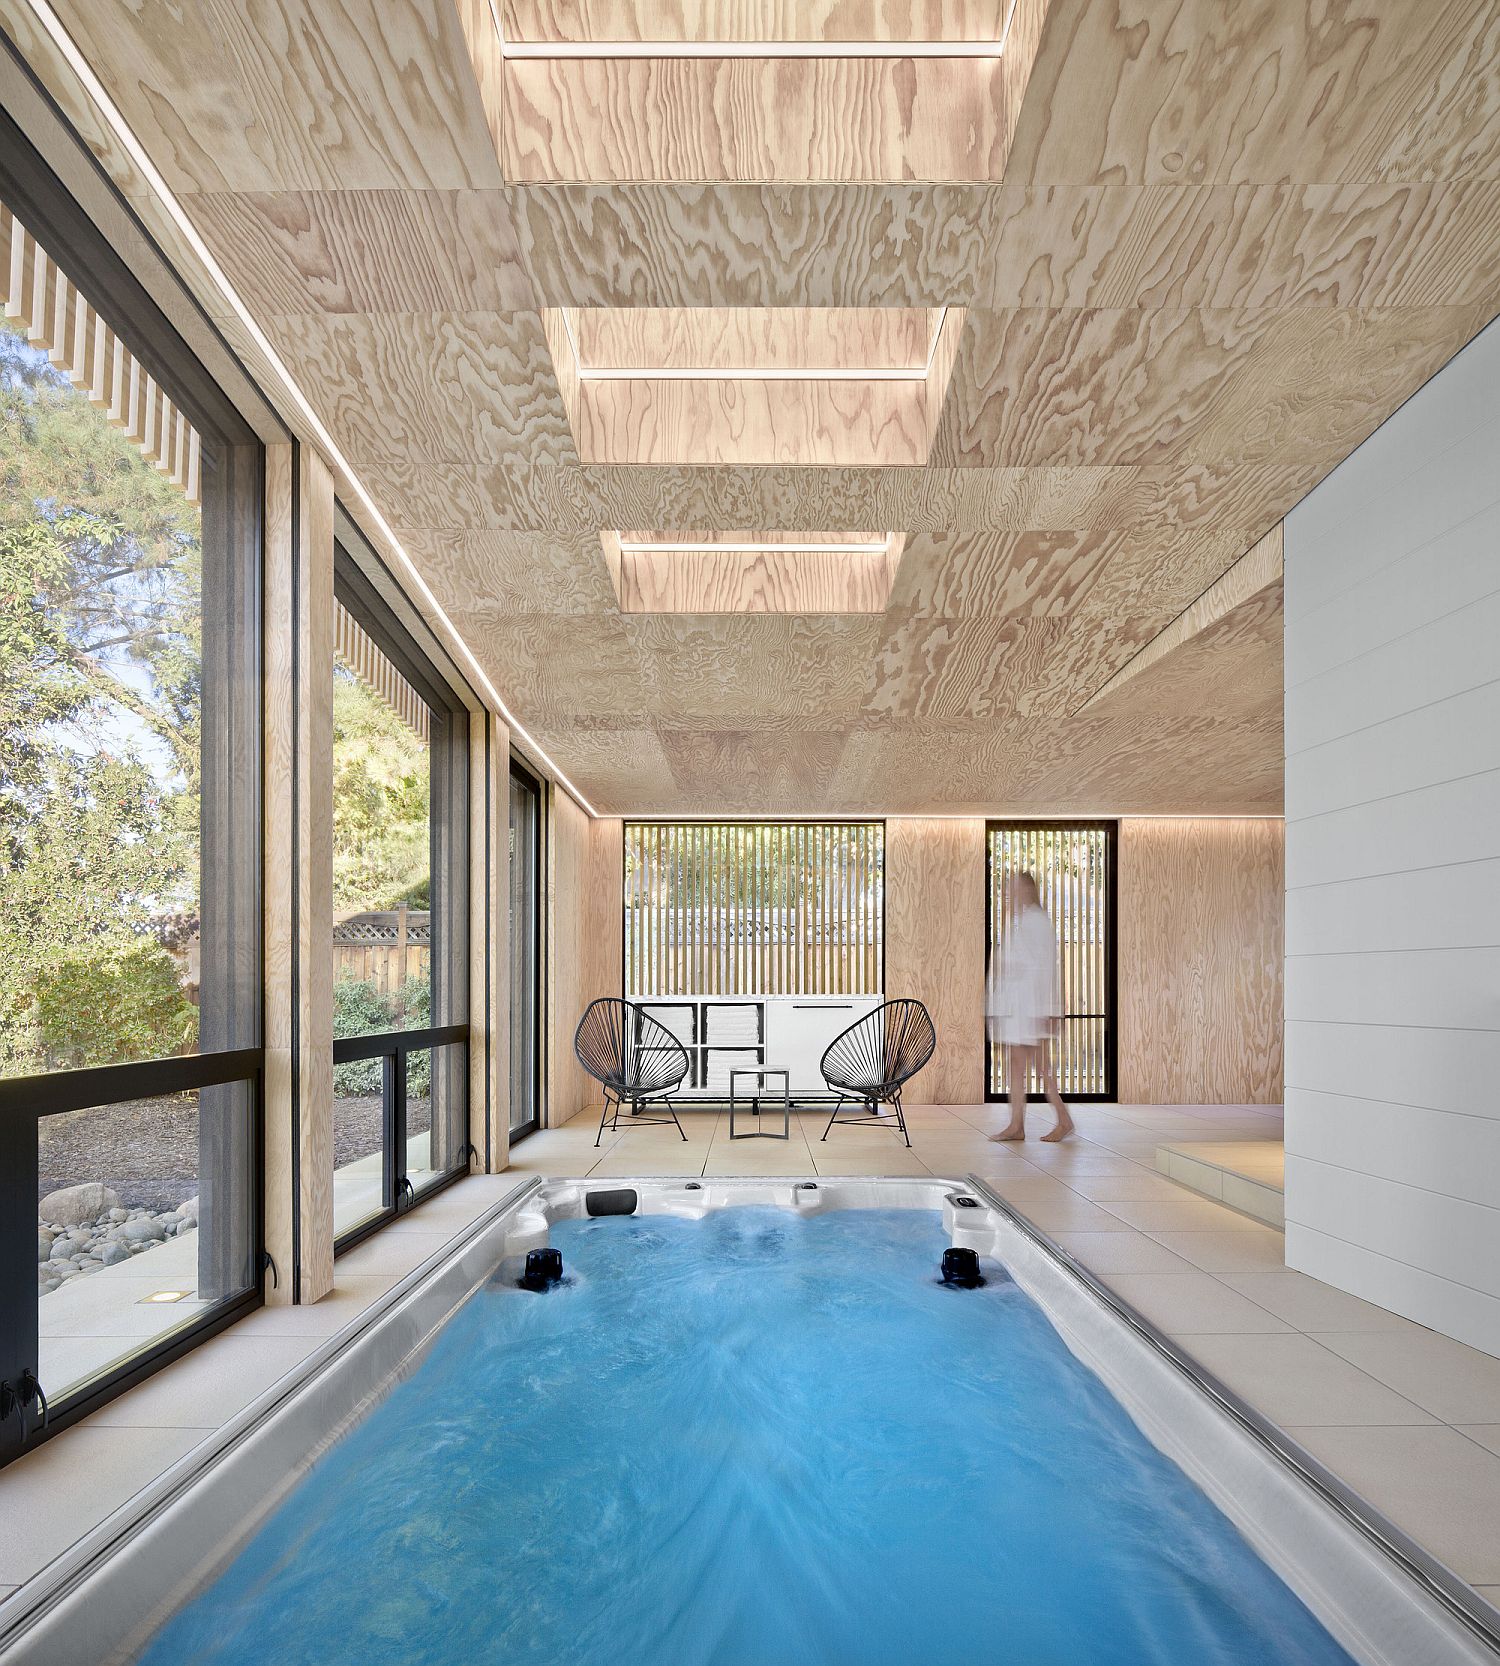 Skylights-and-operable-rainscreens-add-another-layer-of-ventilation-to-the-stunning-contemporary-pool-hnouse-inh-Los-Altos